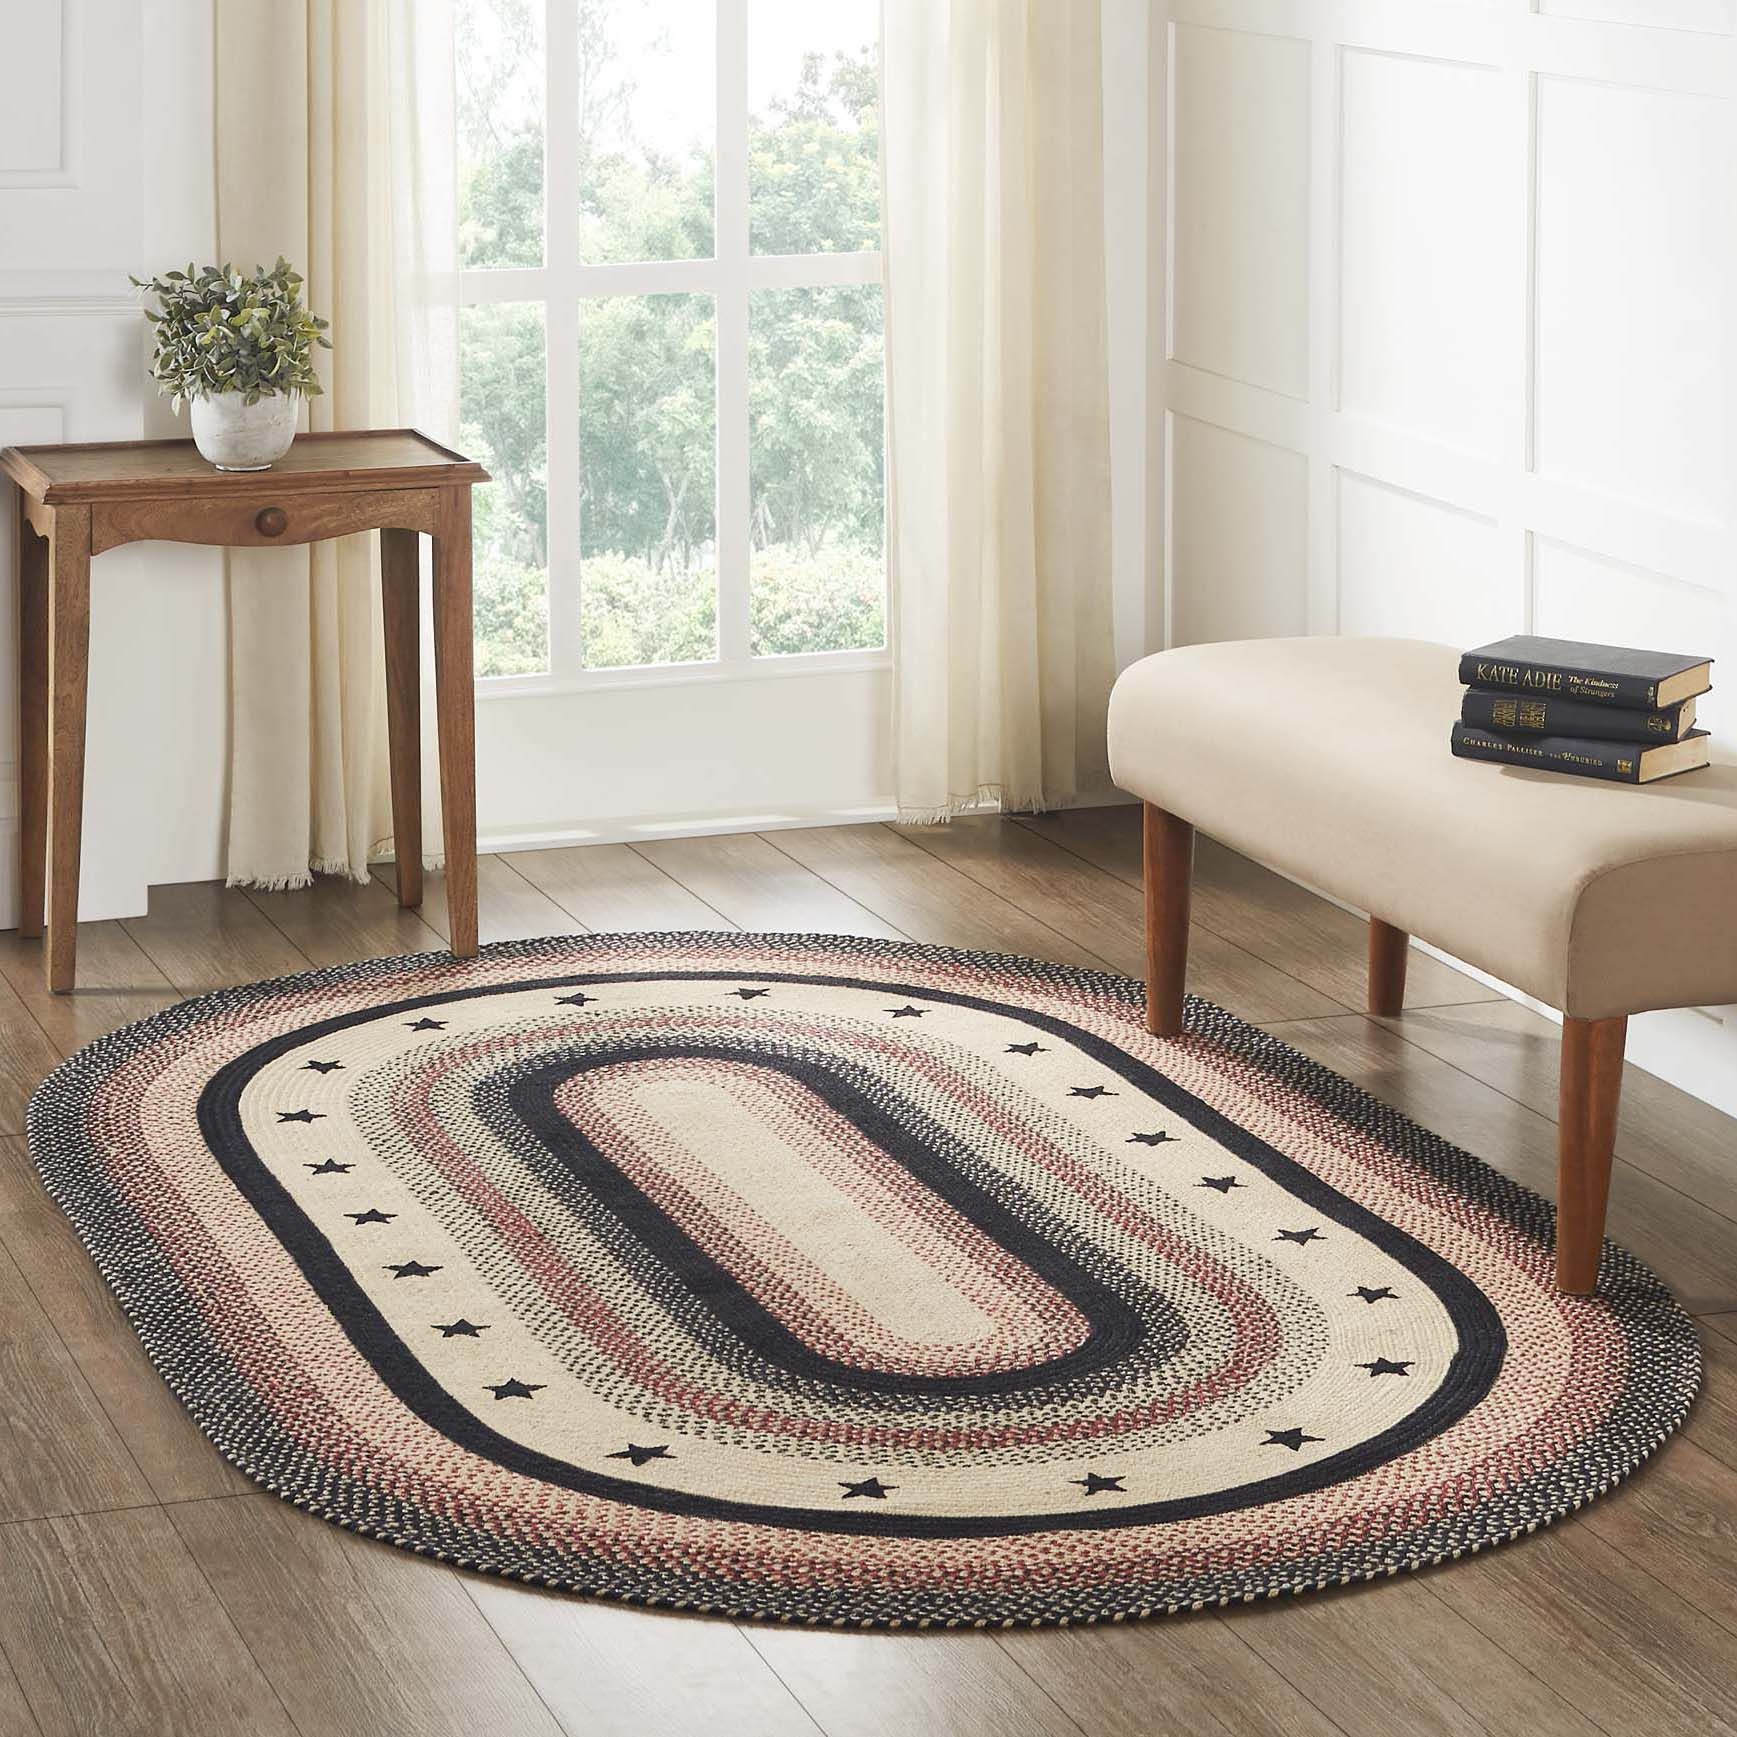 Colonial Star Jute Rug Oval W/ Pad 60x96 – 67009 In Timeless Oval Rugs (View 3 of 15)